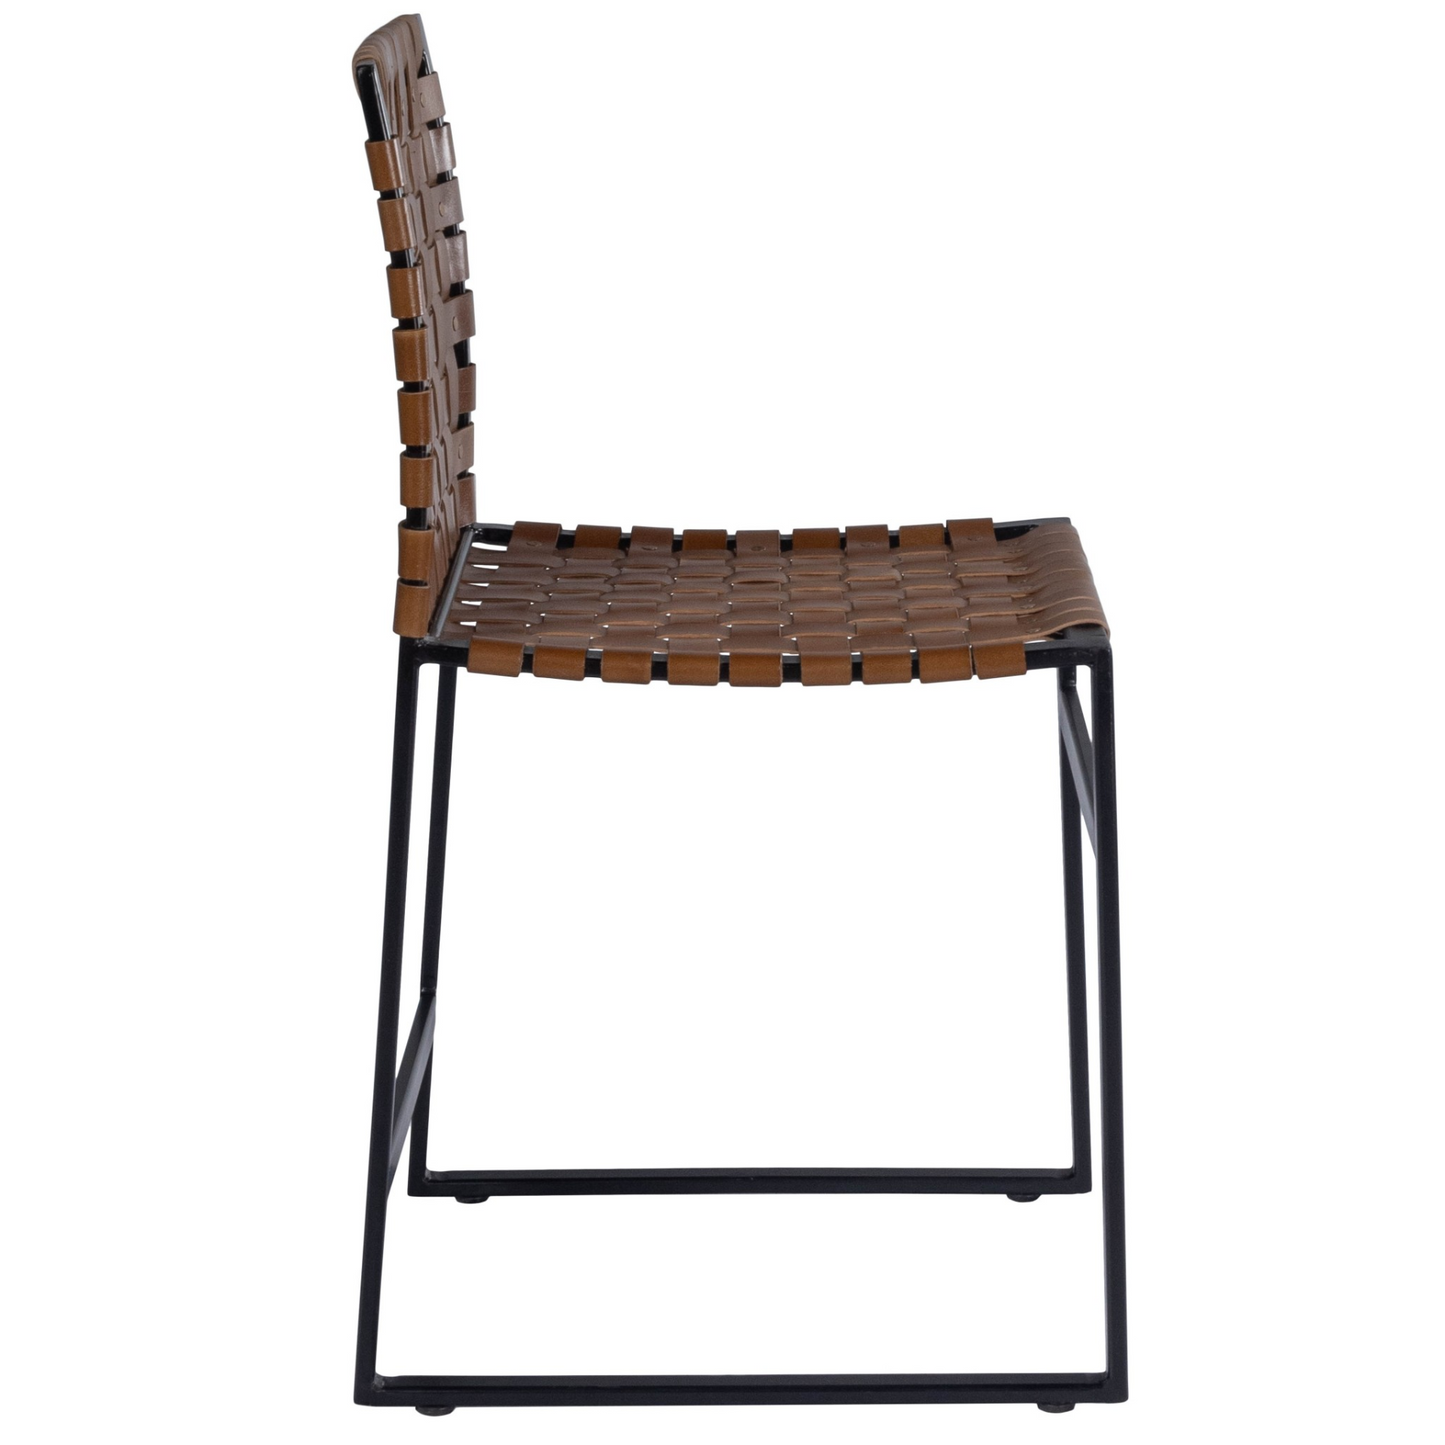 Woven Leather Chair - Brown Leather